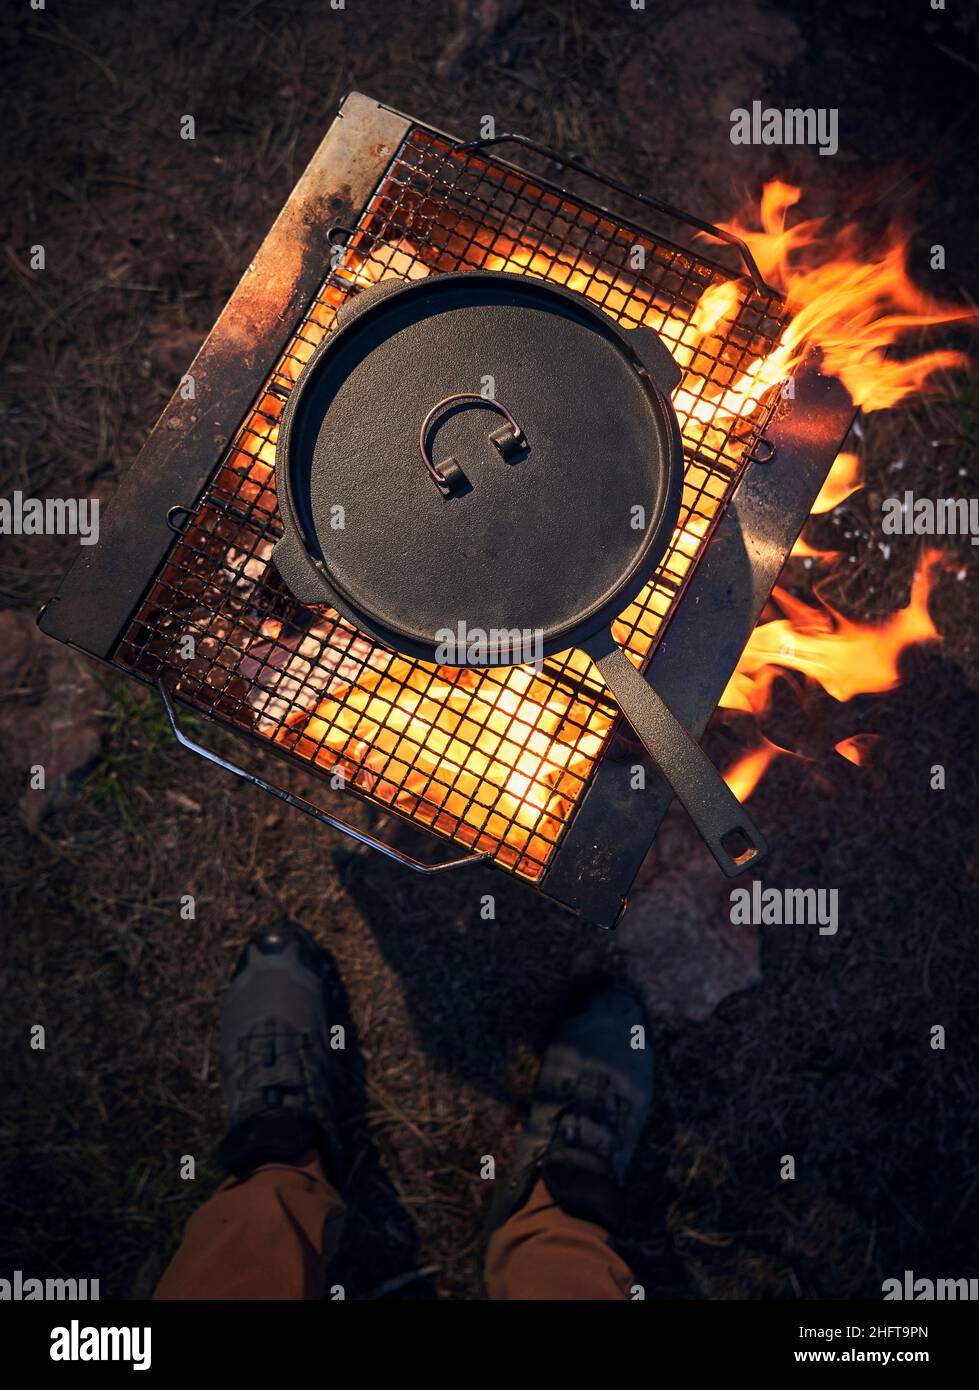 Man stands over a cast iron cooking over an open fire. Stock Photo